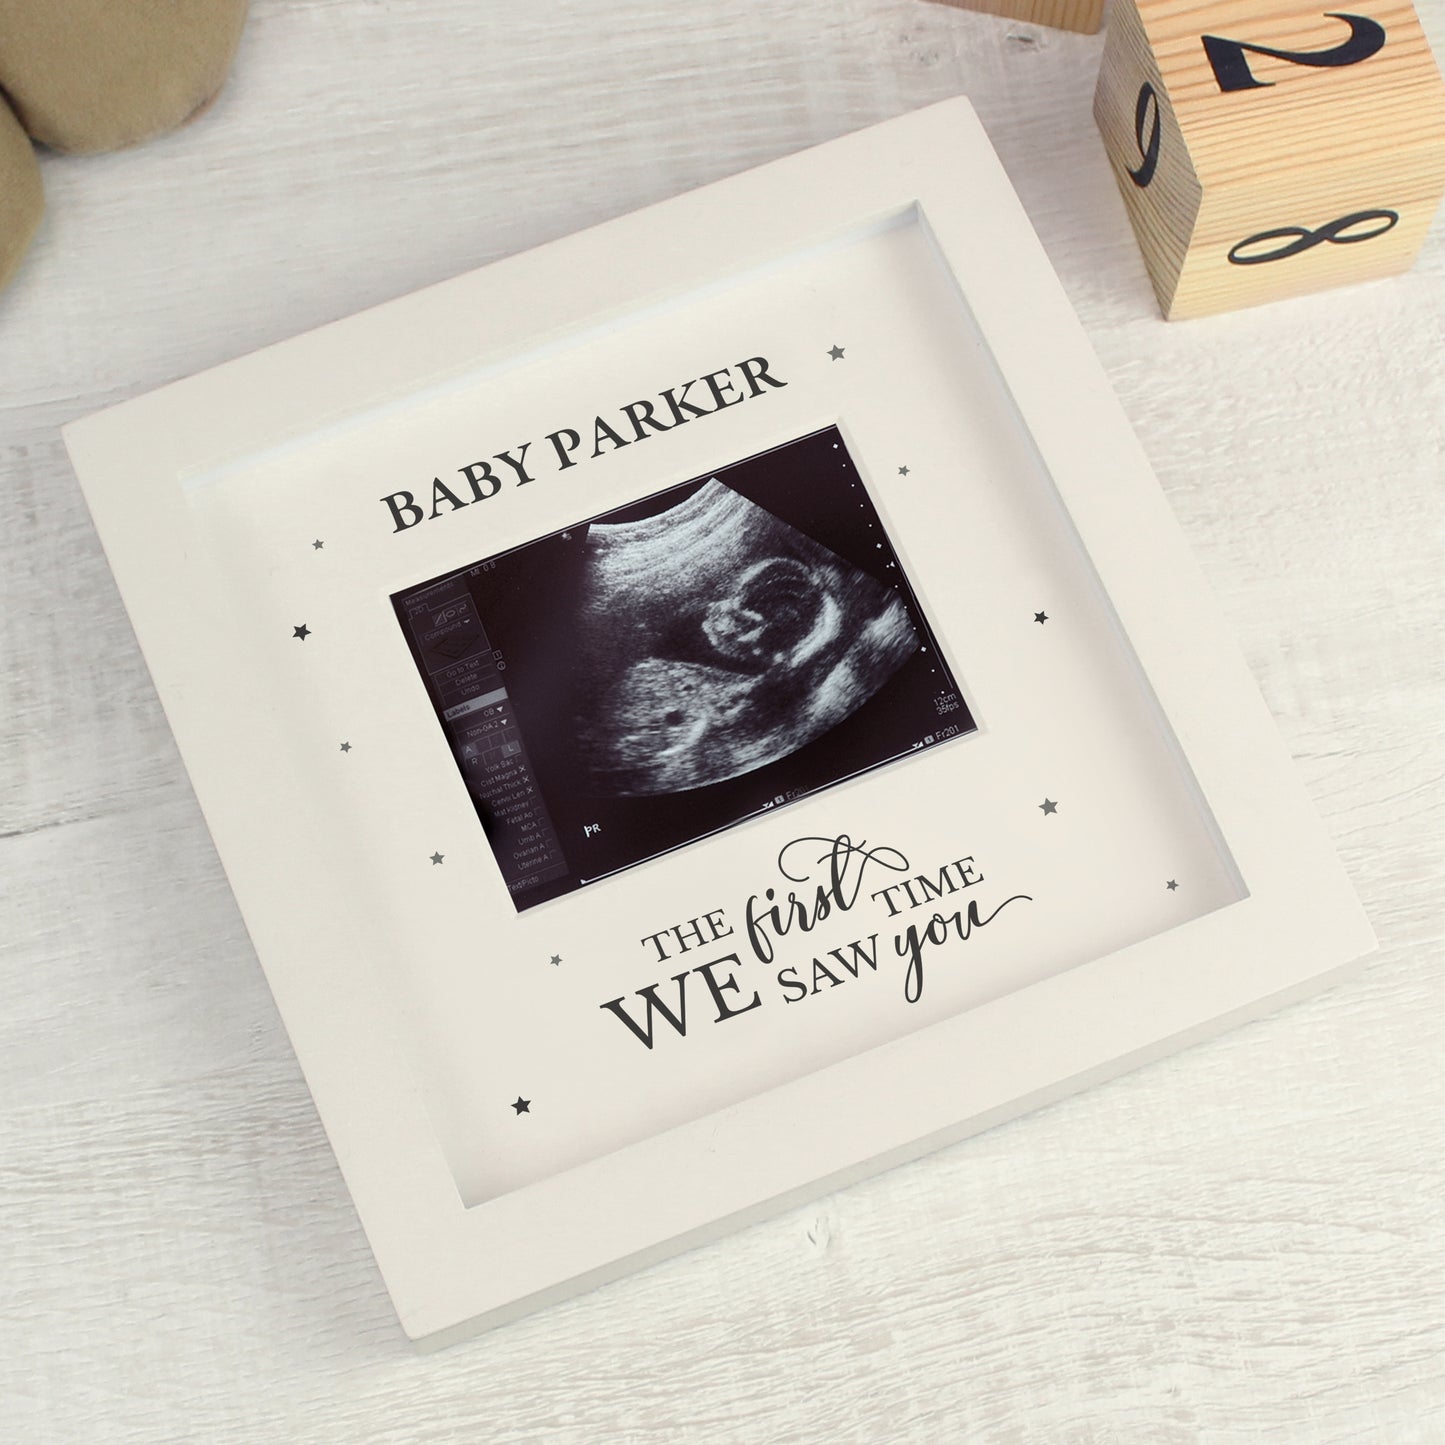 Personalised All Things Grow Baby Scan Frame - Personalise It!